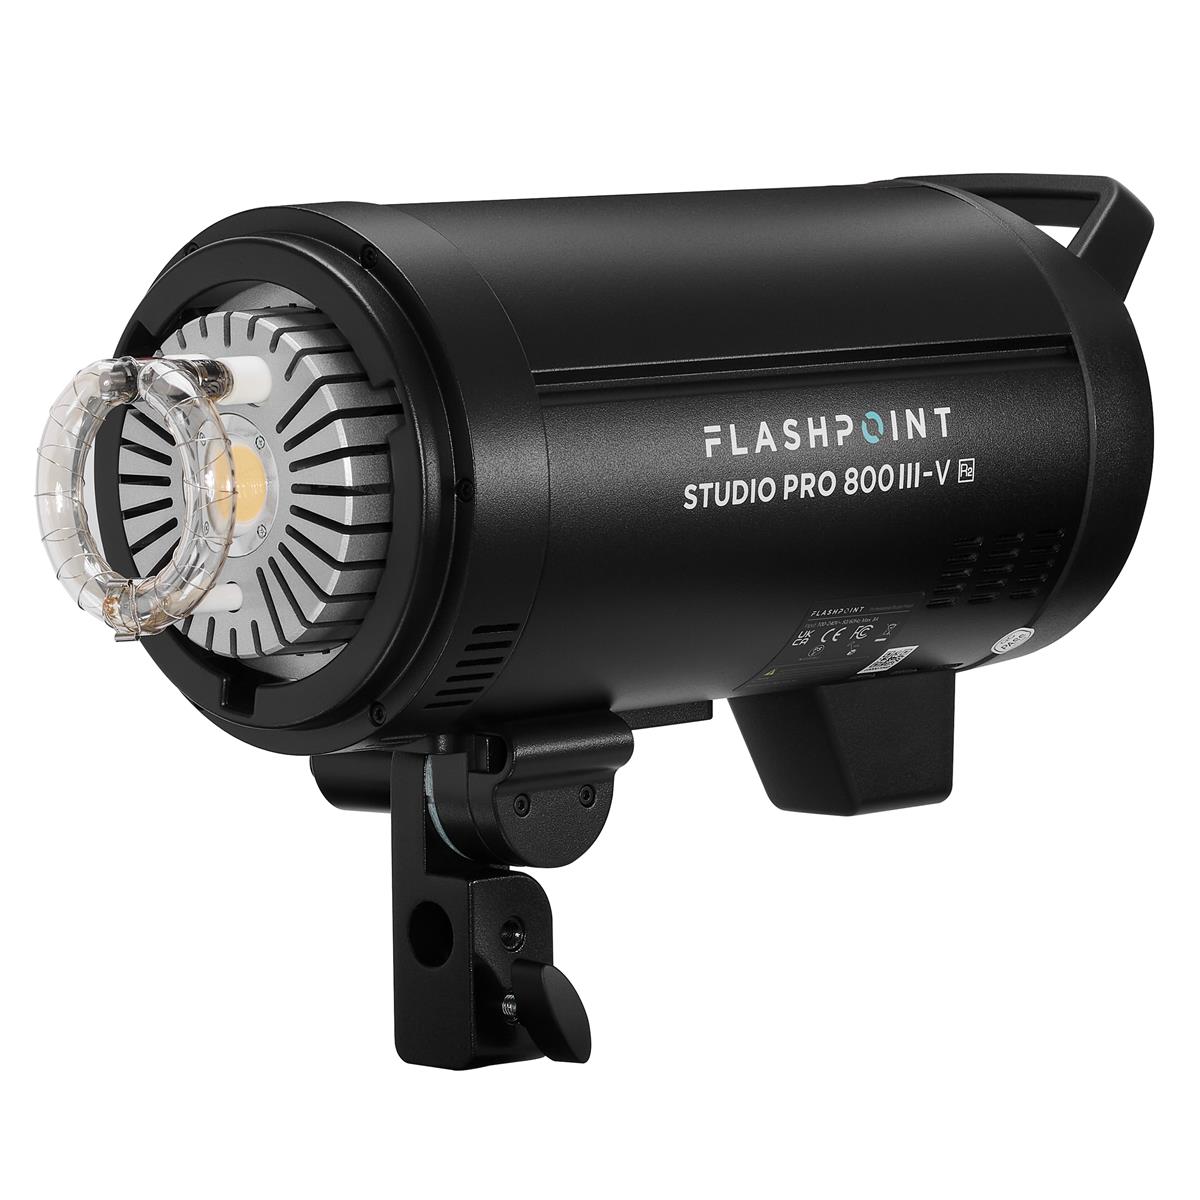 Image of Flashpoint Studio Pro 800 III-V 800Ws R2 Monolight Flash w/Lamp and Bowens Mount